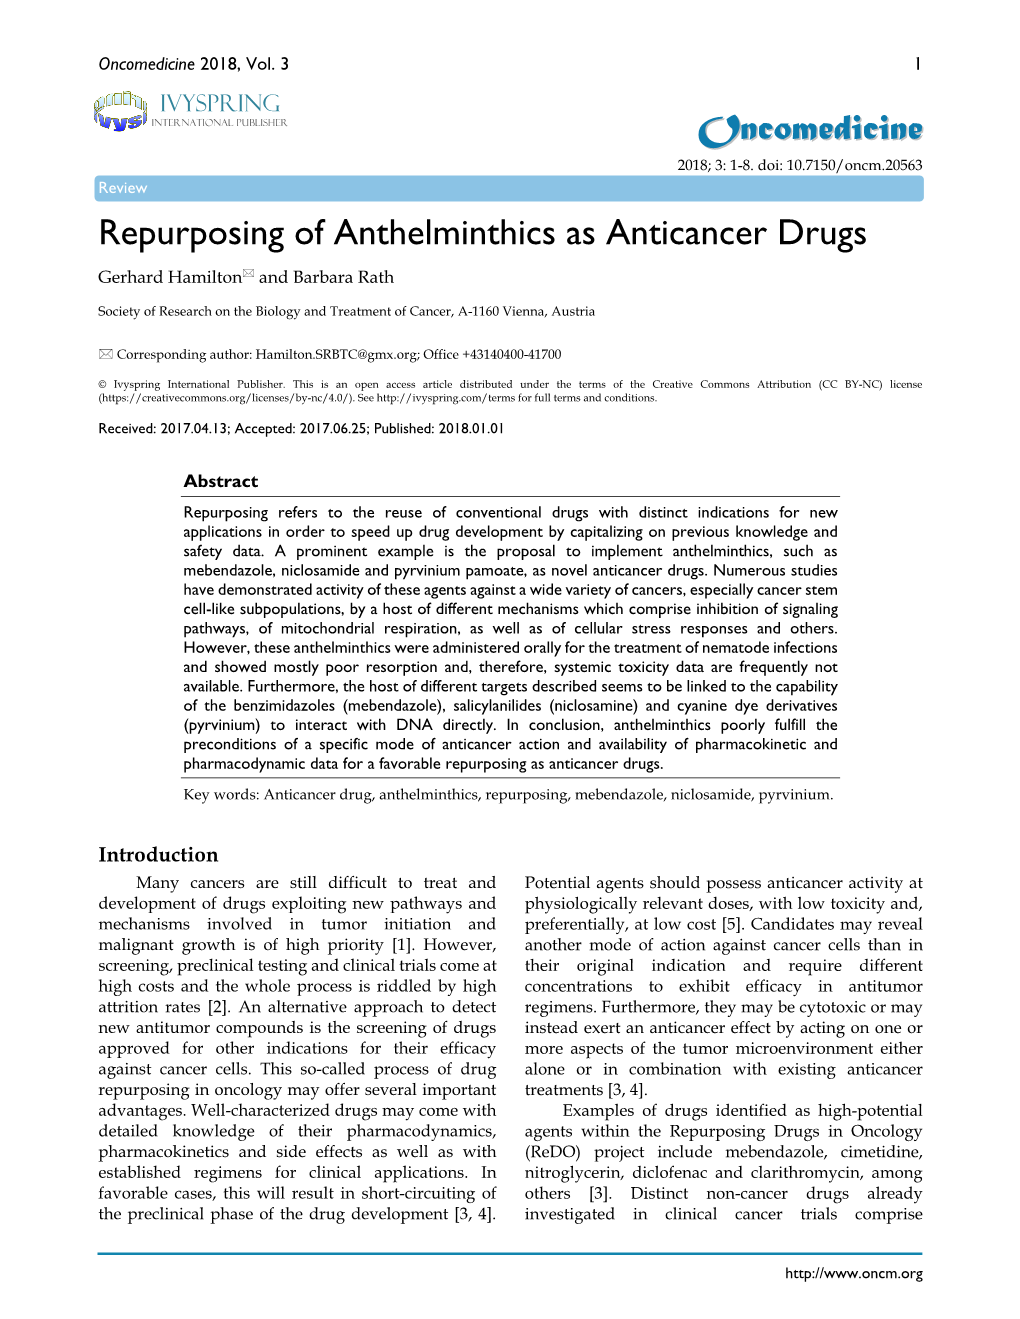 Oncomedicine Repurposing of Anthelminthics As Anticancer Drugs